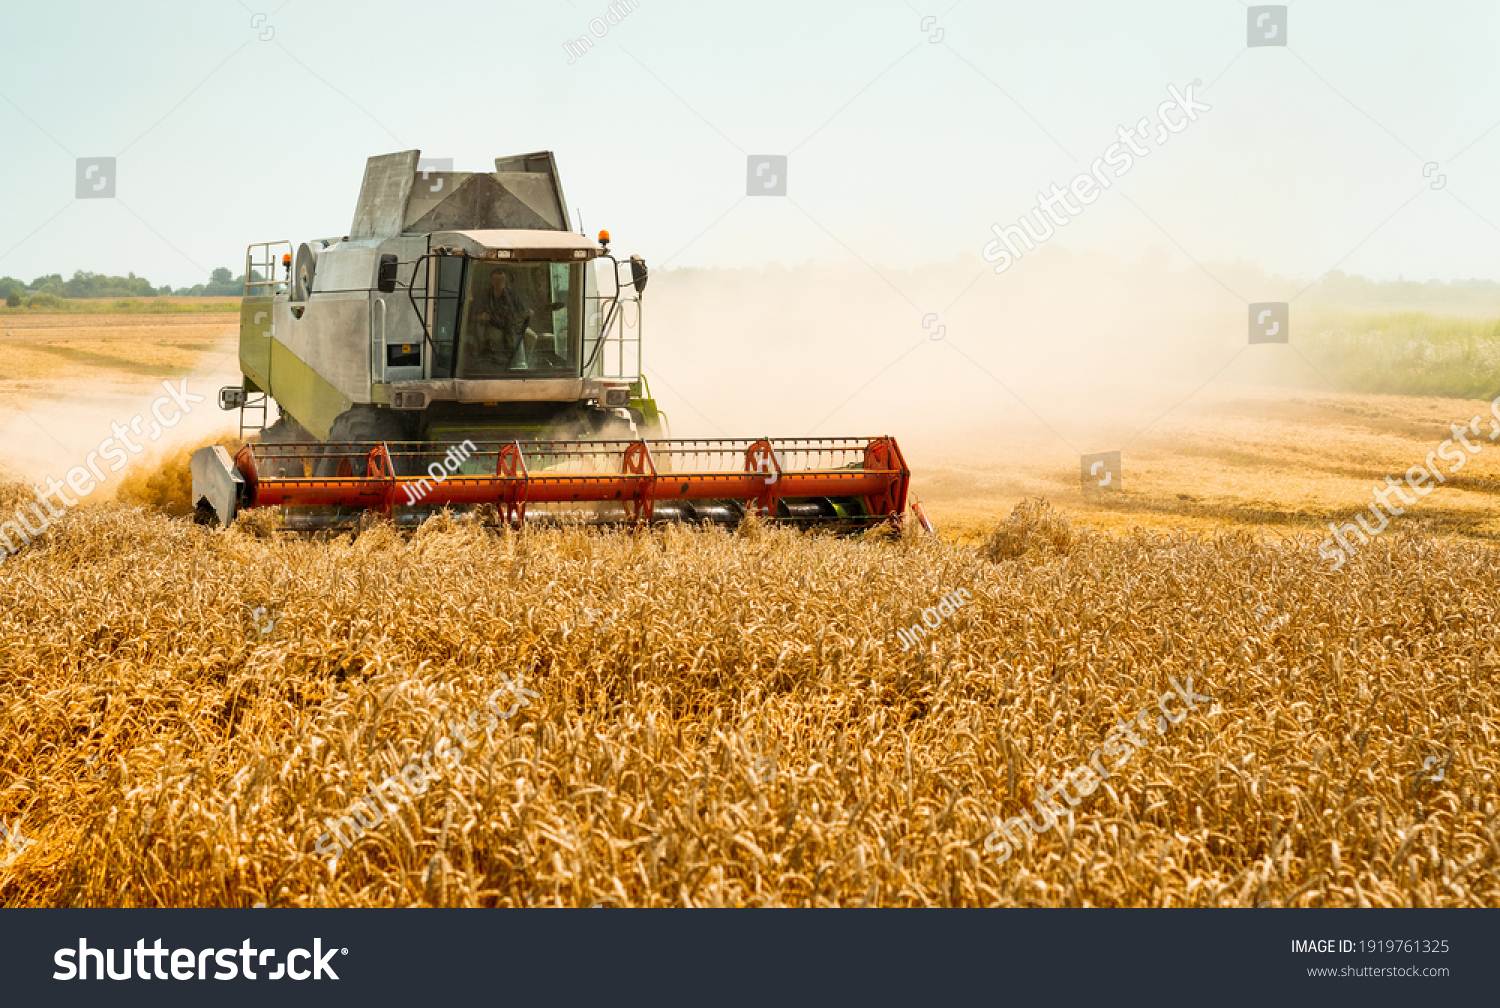 Rotary straw walker cut and threshes ripe wheat grain. Combine harvesters with grain header, wide chaff spreader reaping cereal ears. Gathering crop by agricultural machinery on field on summer season #1919761325